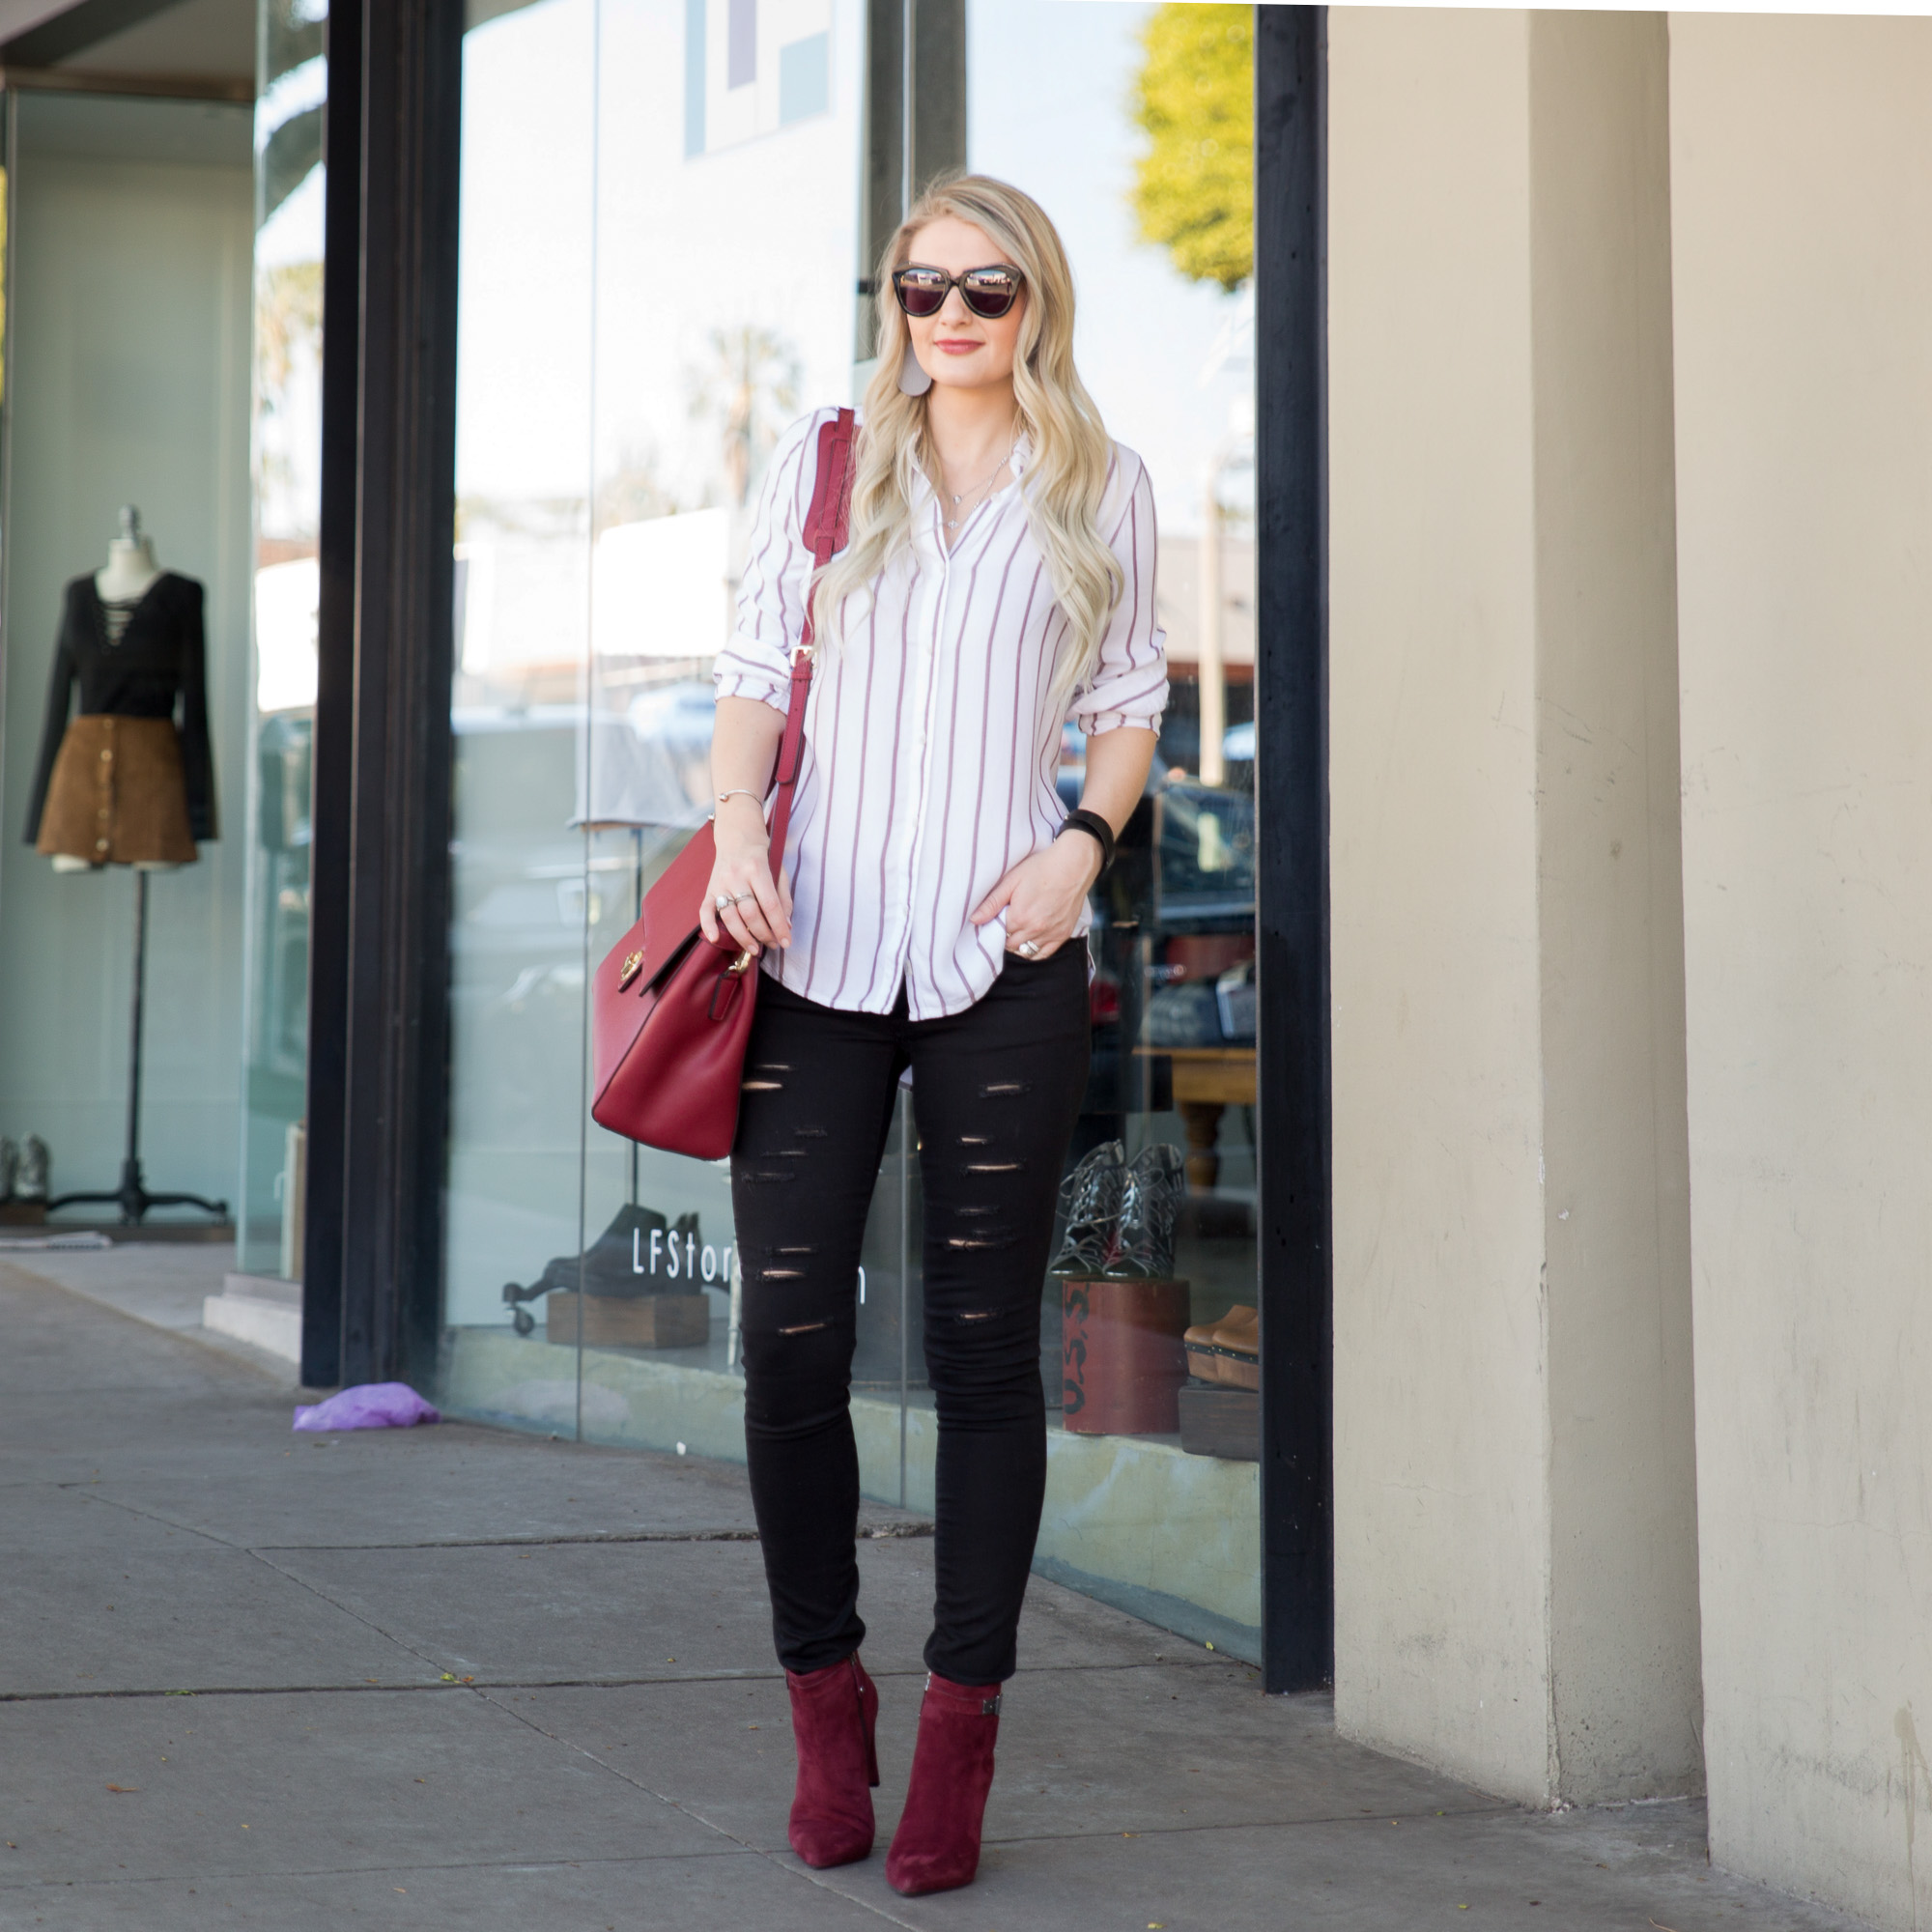 rocker chic with accents of oxblood